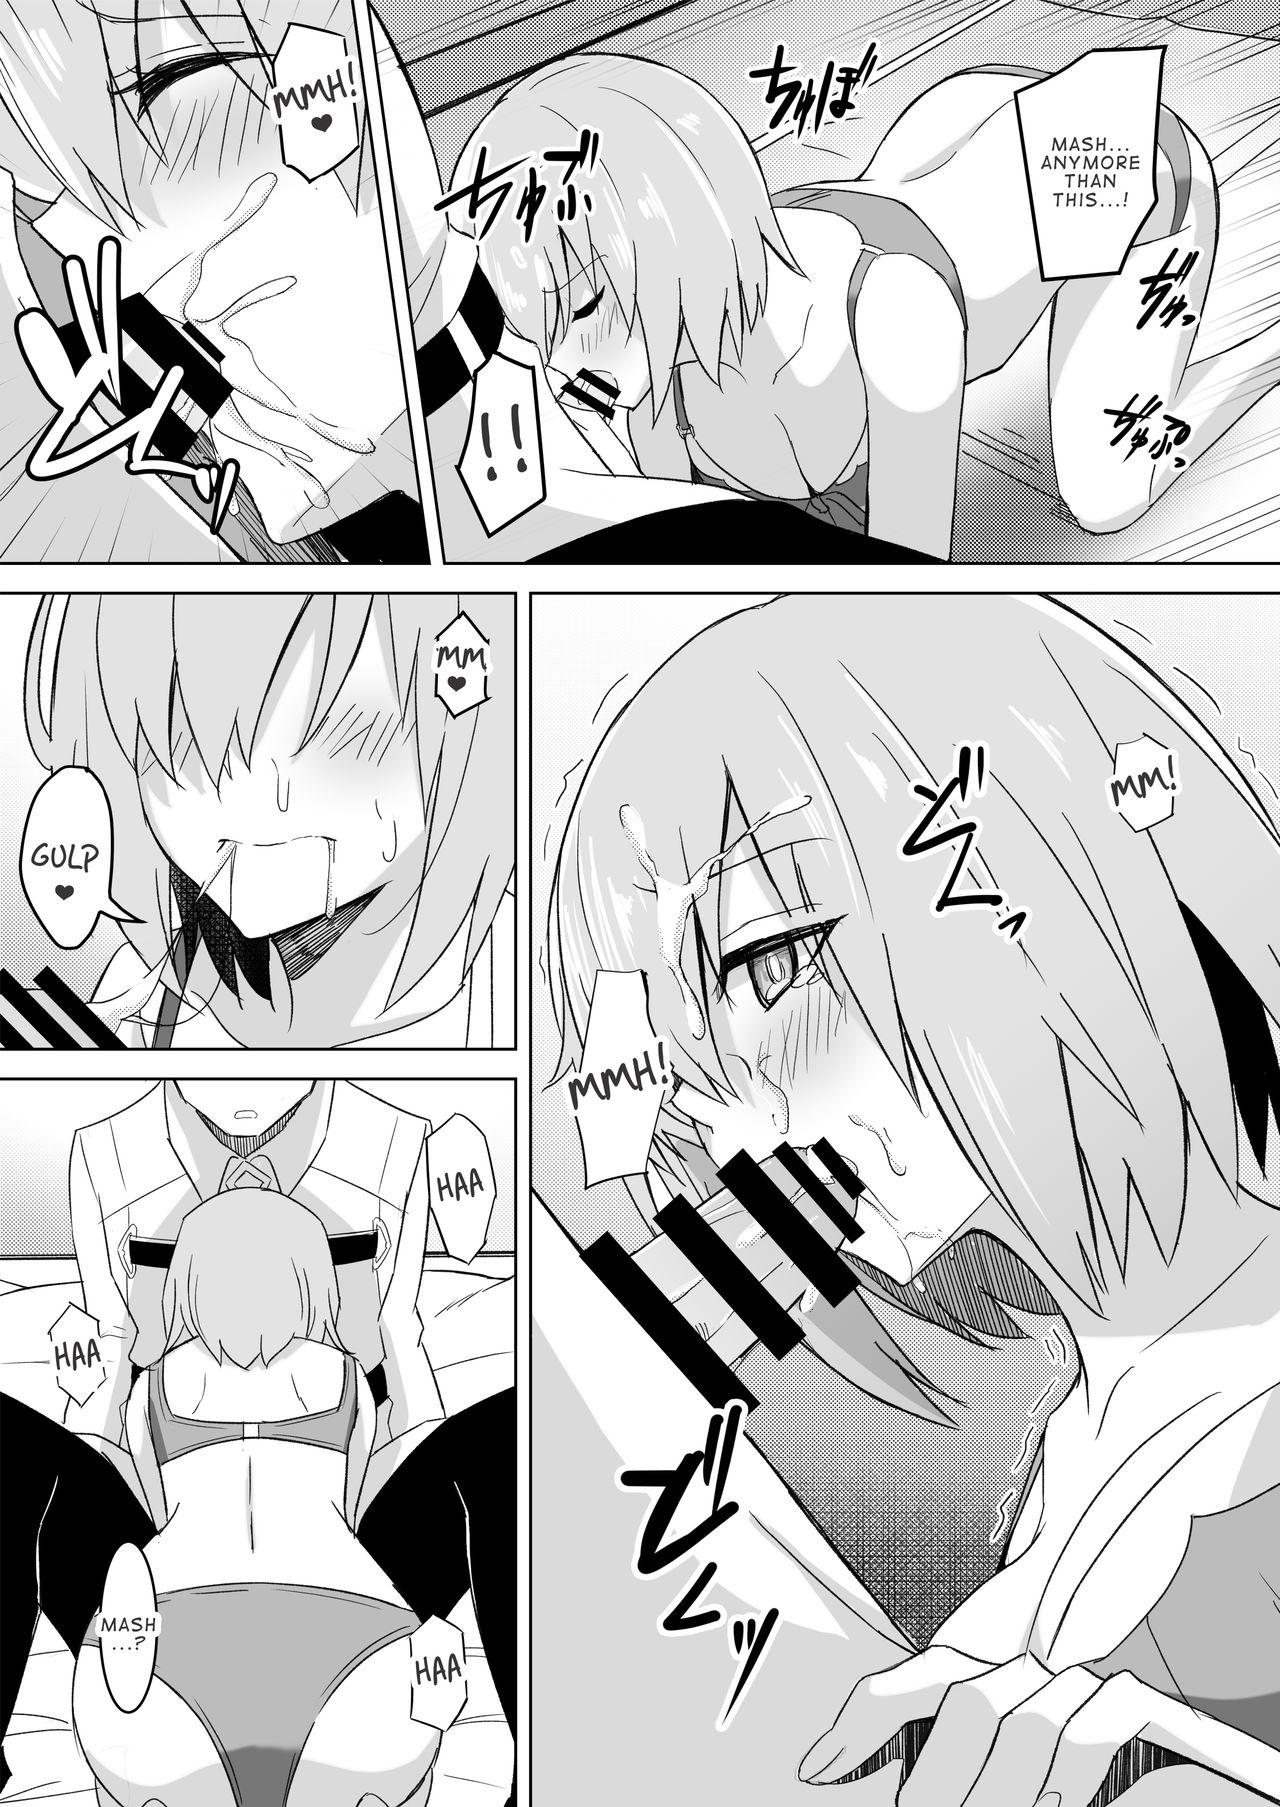 Creampies Mash Was Jealousy - Fate grand order Gay Longhair - Page 8